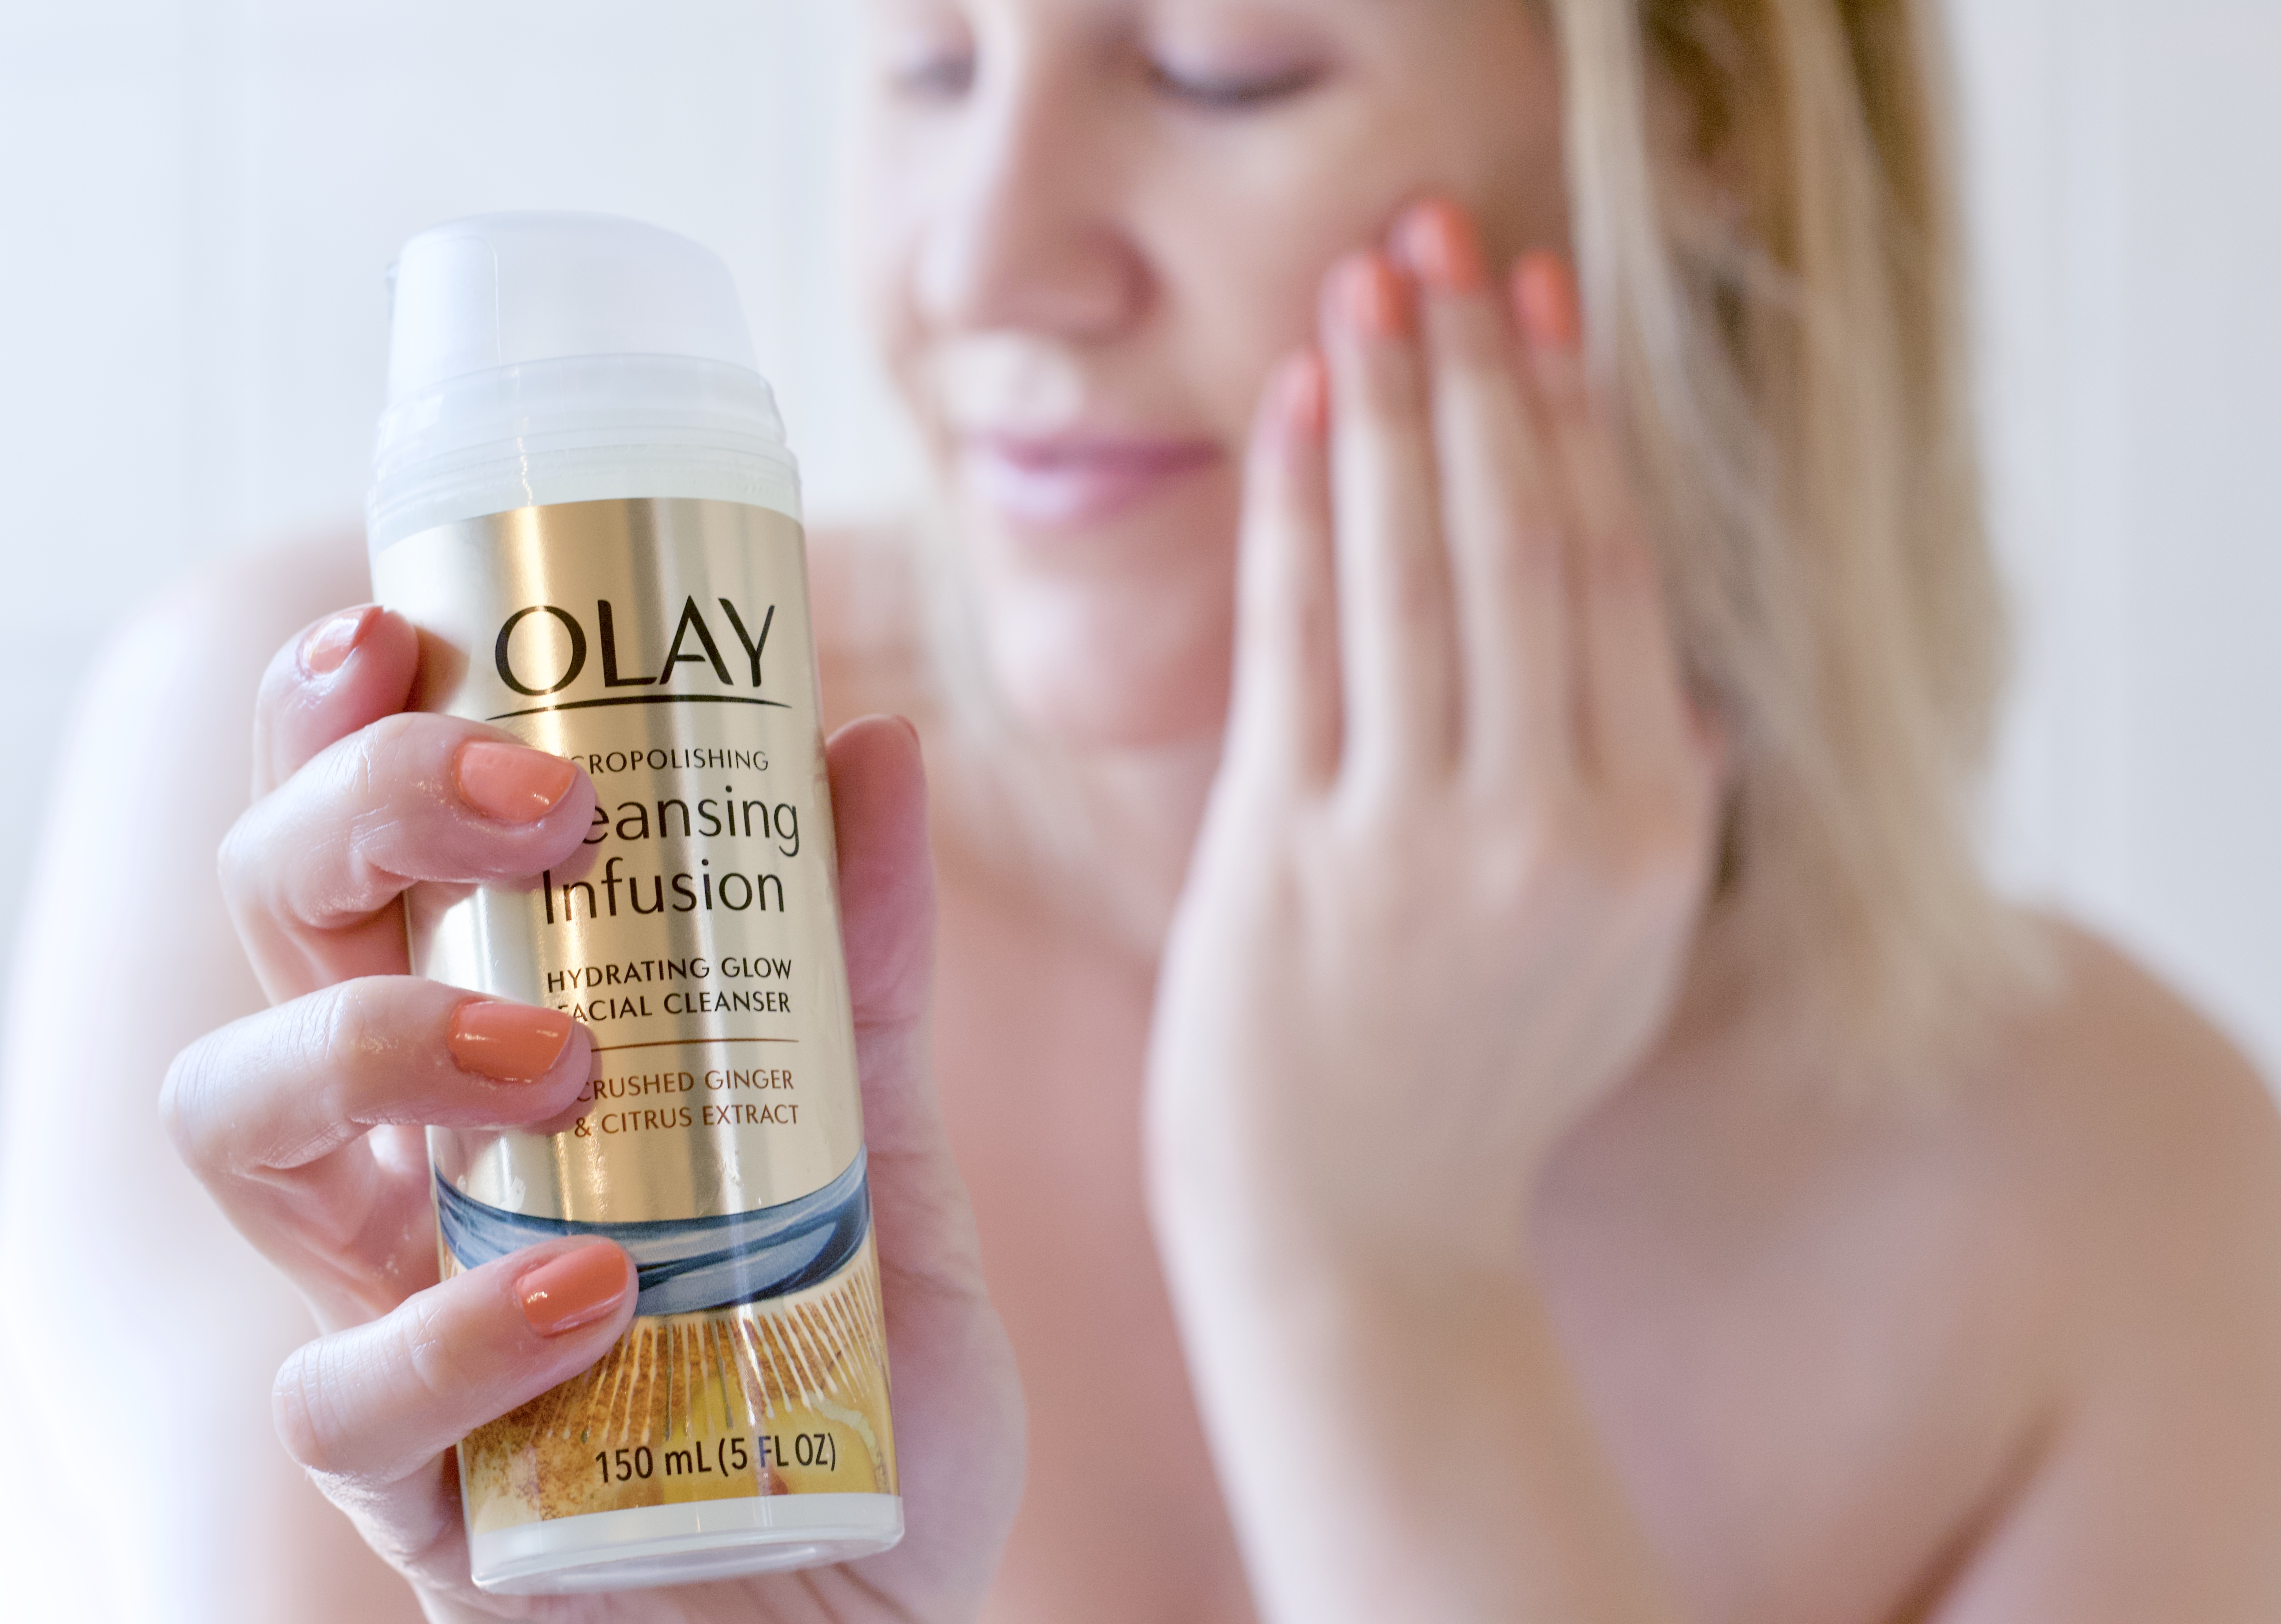 olay cleansing infusions face wash #skincare #affordableskincare #olay